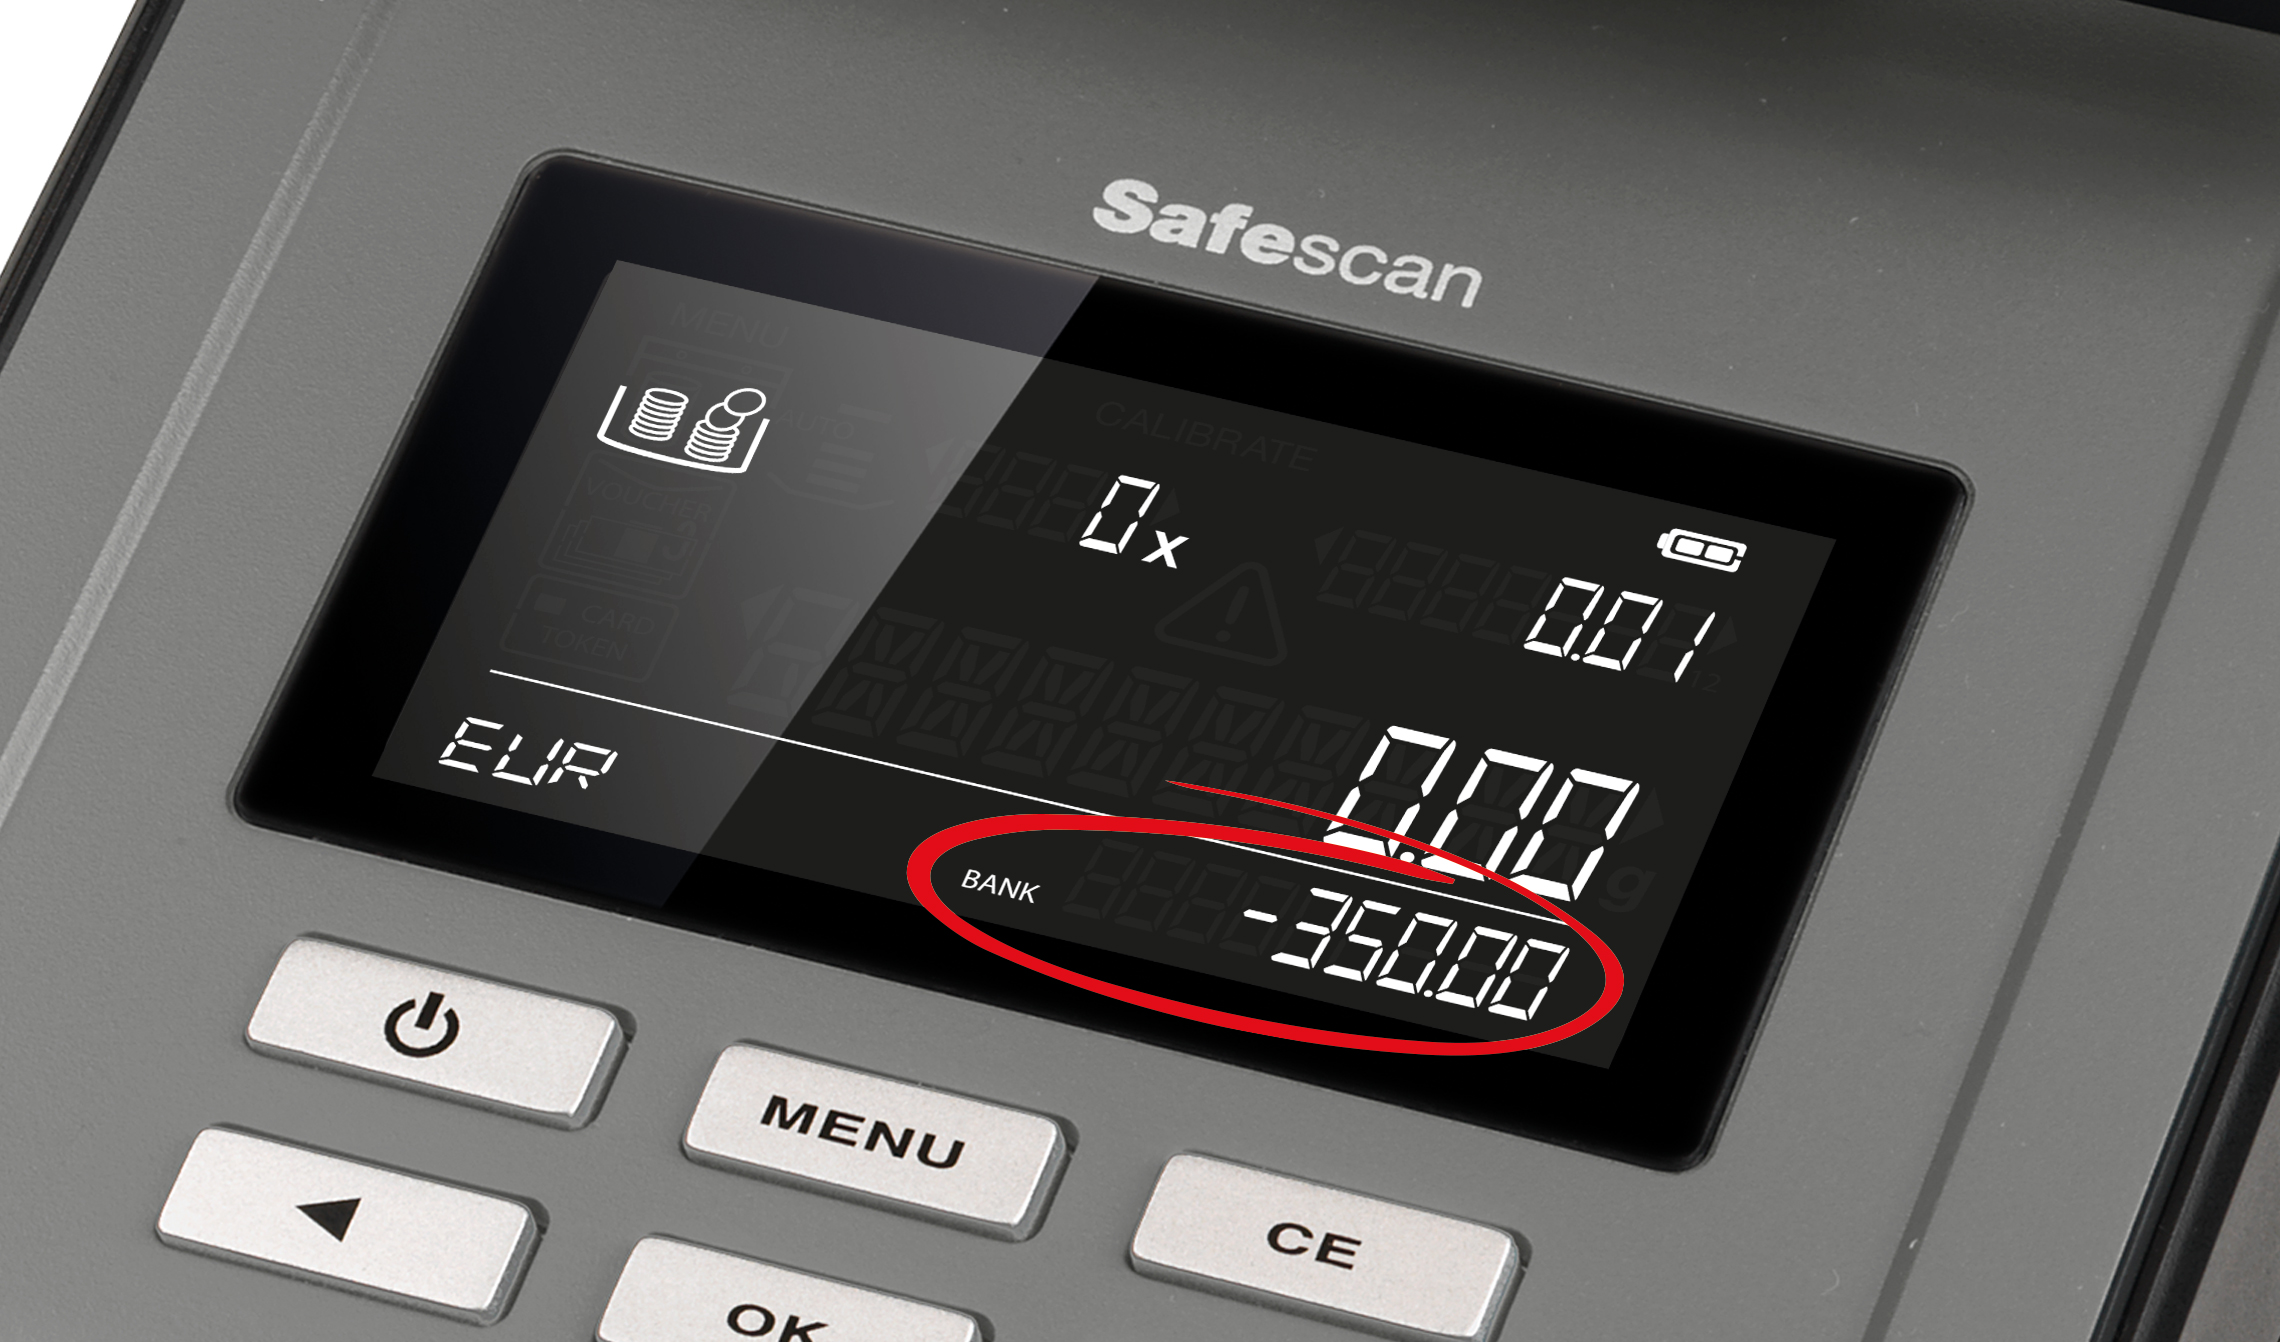 Safescan 6165 Money Counting Scale